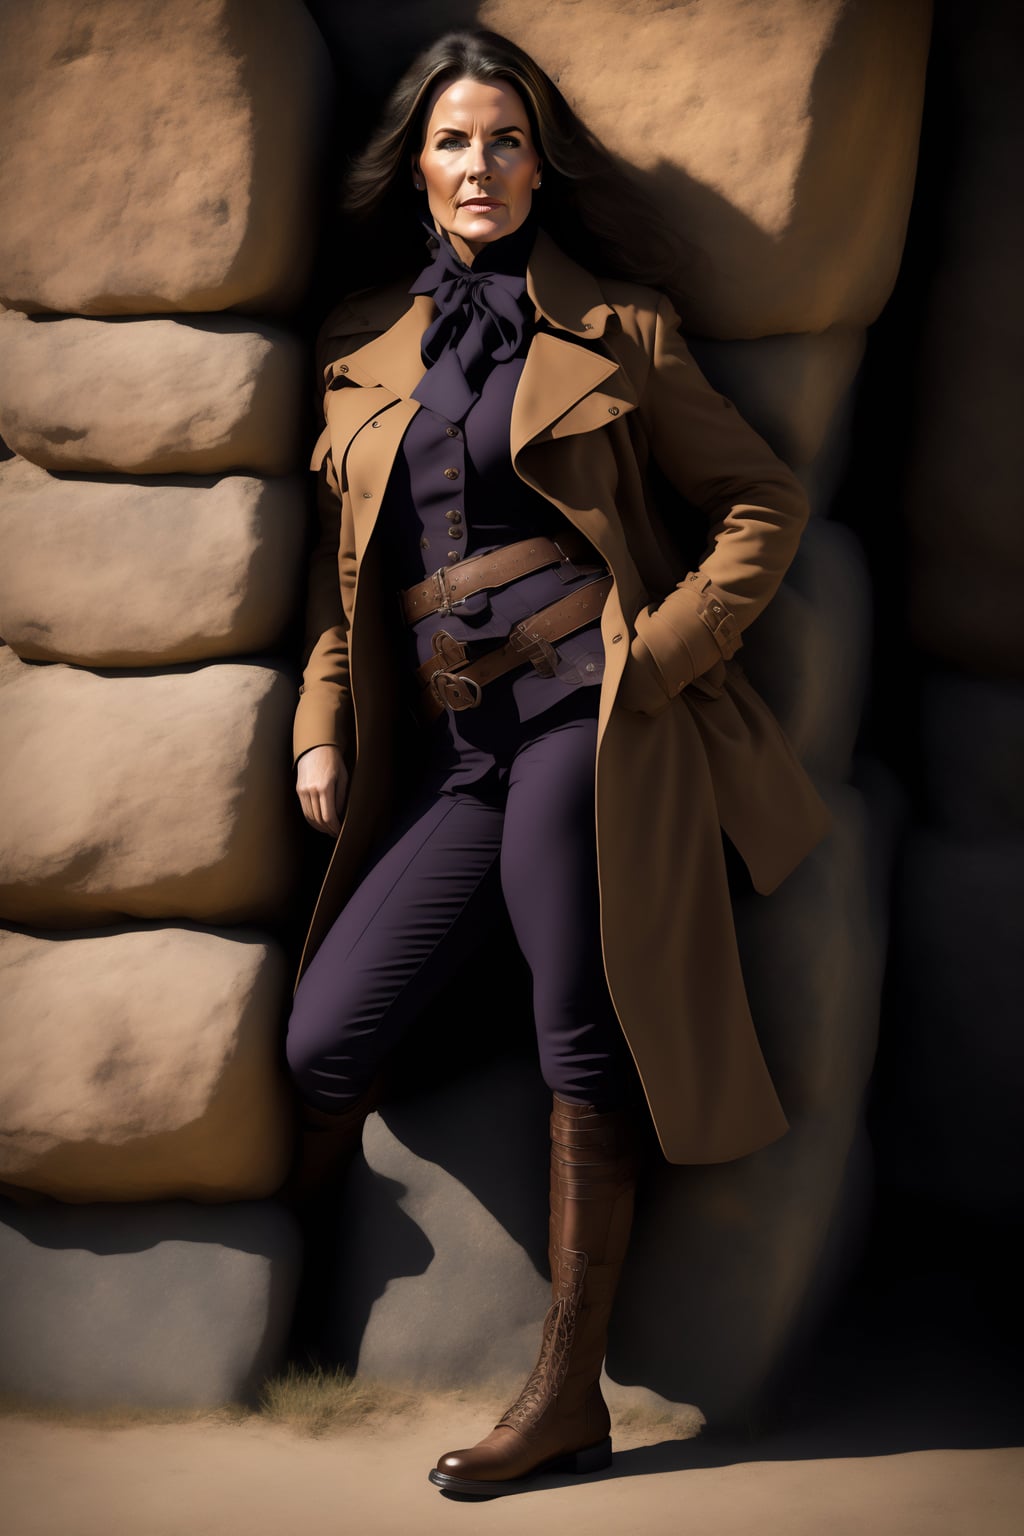 Lexica - Young blonde woman with square sunglasses wearing an open Burberry trench  coat, from the right shoulder hangs a Louis Vuitton Batignolles ha